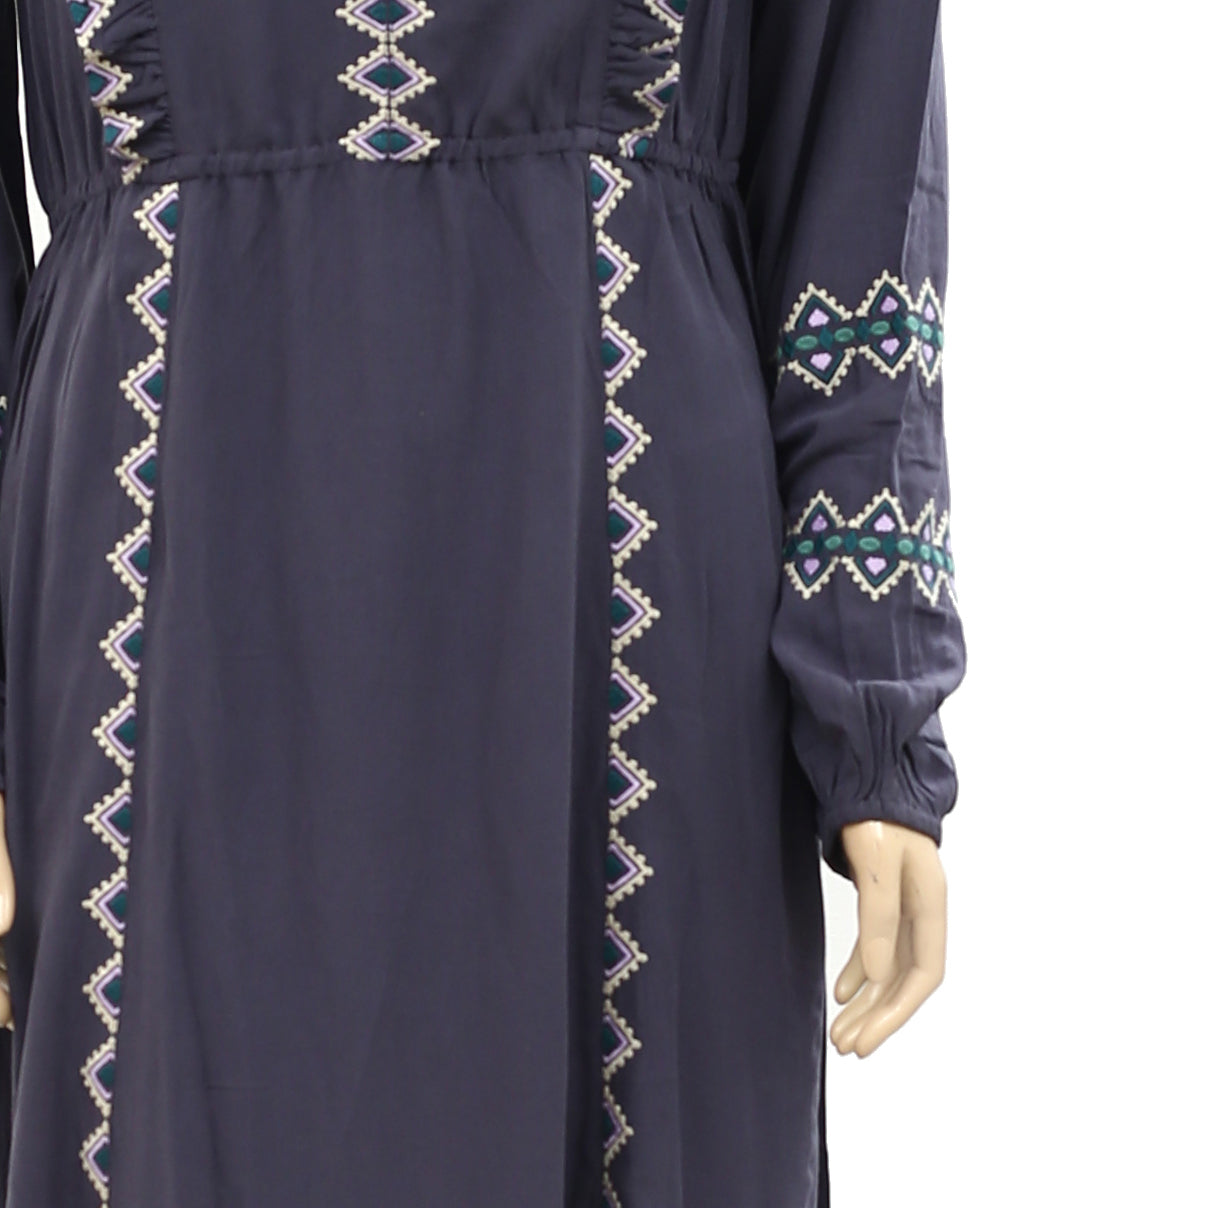 Odd Molly Anthropologie Embroidered Maxi Long Dress